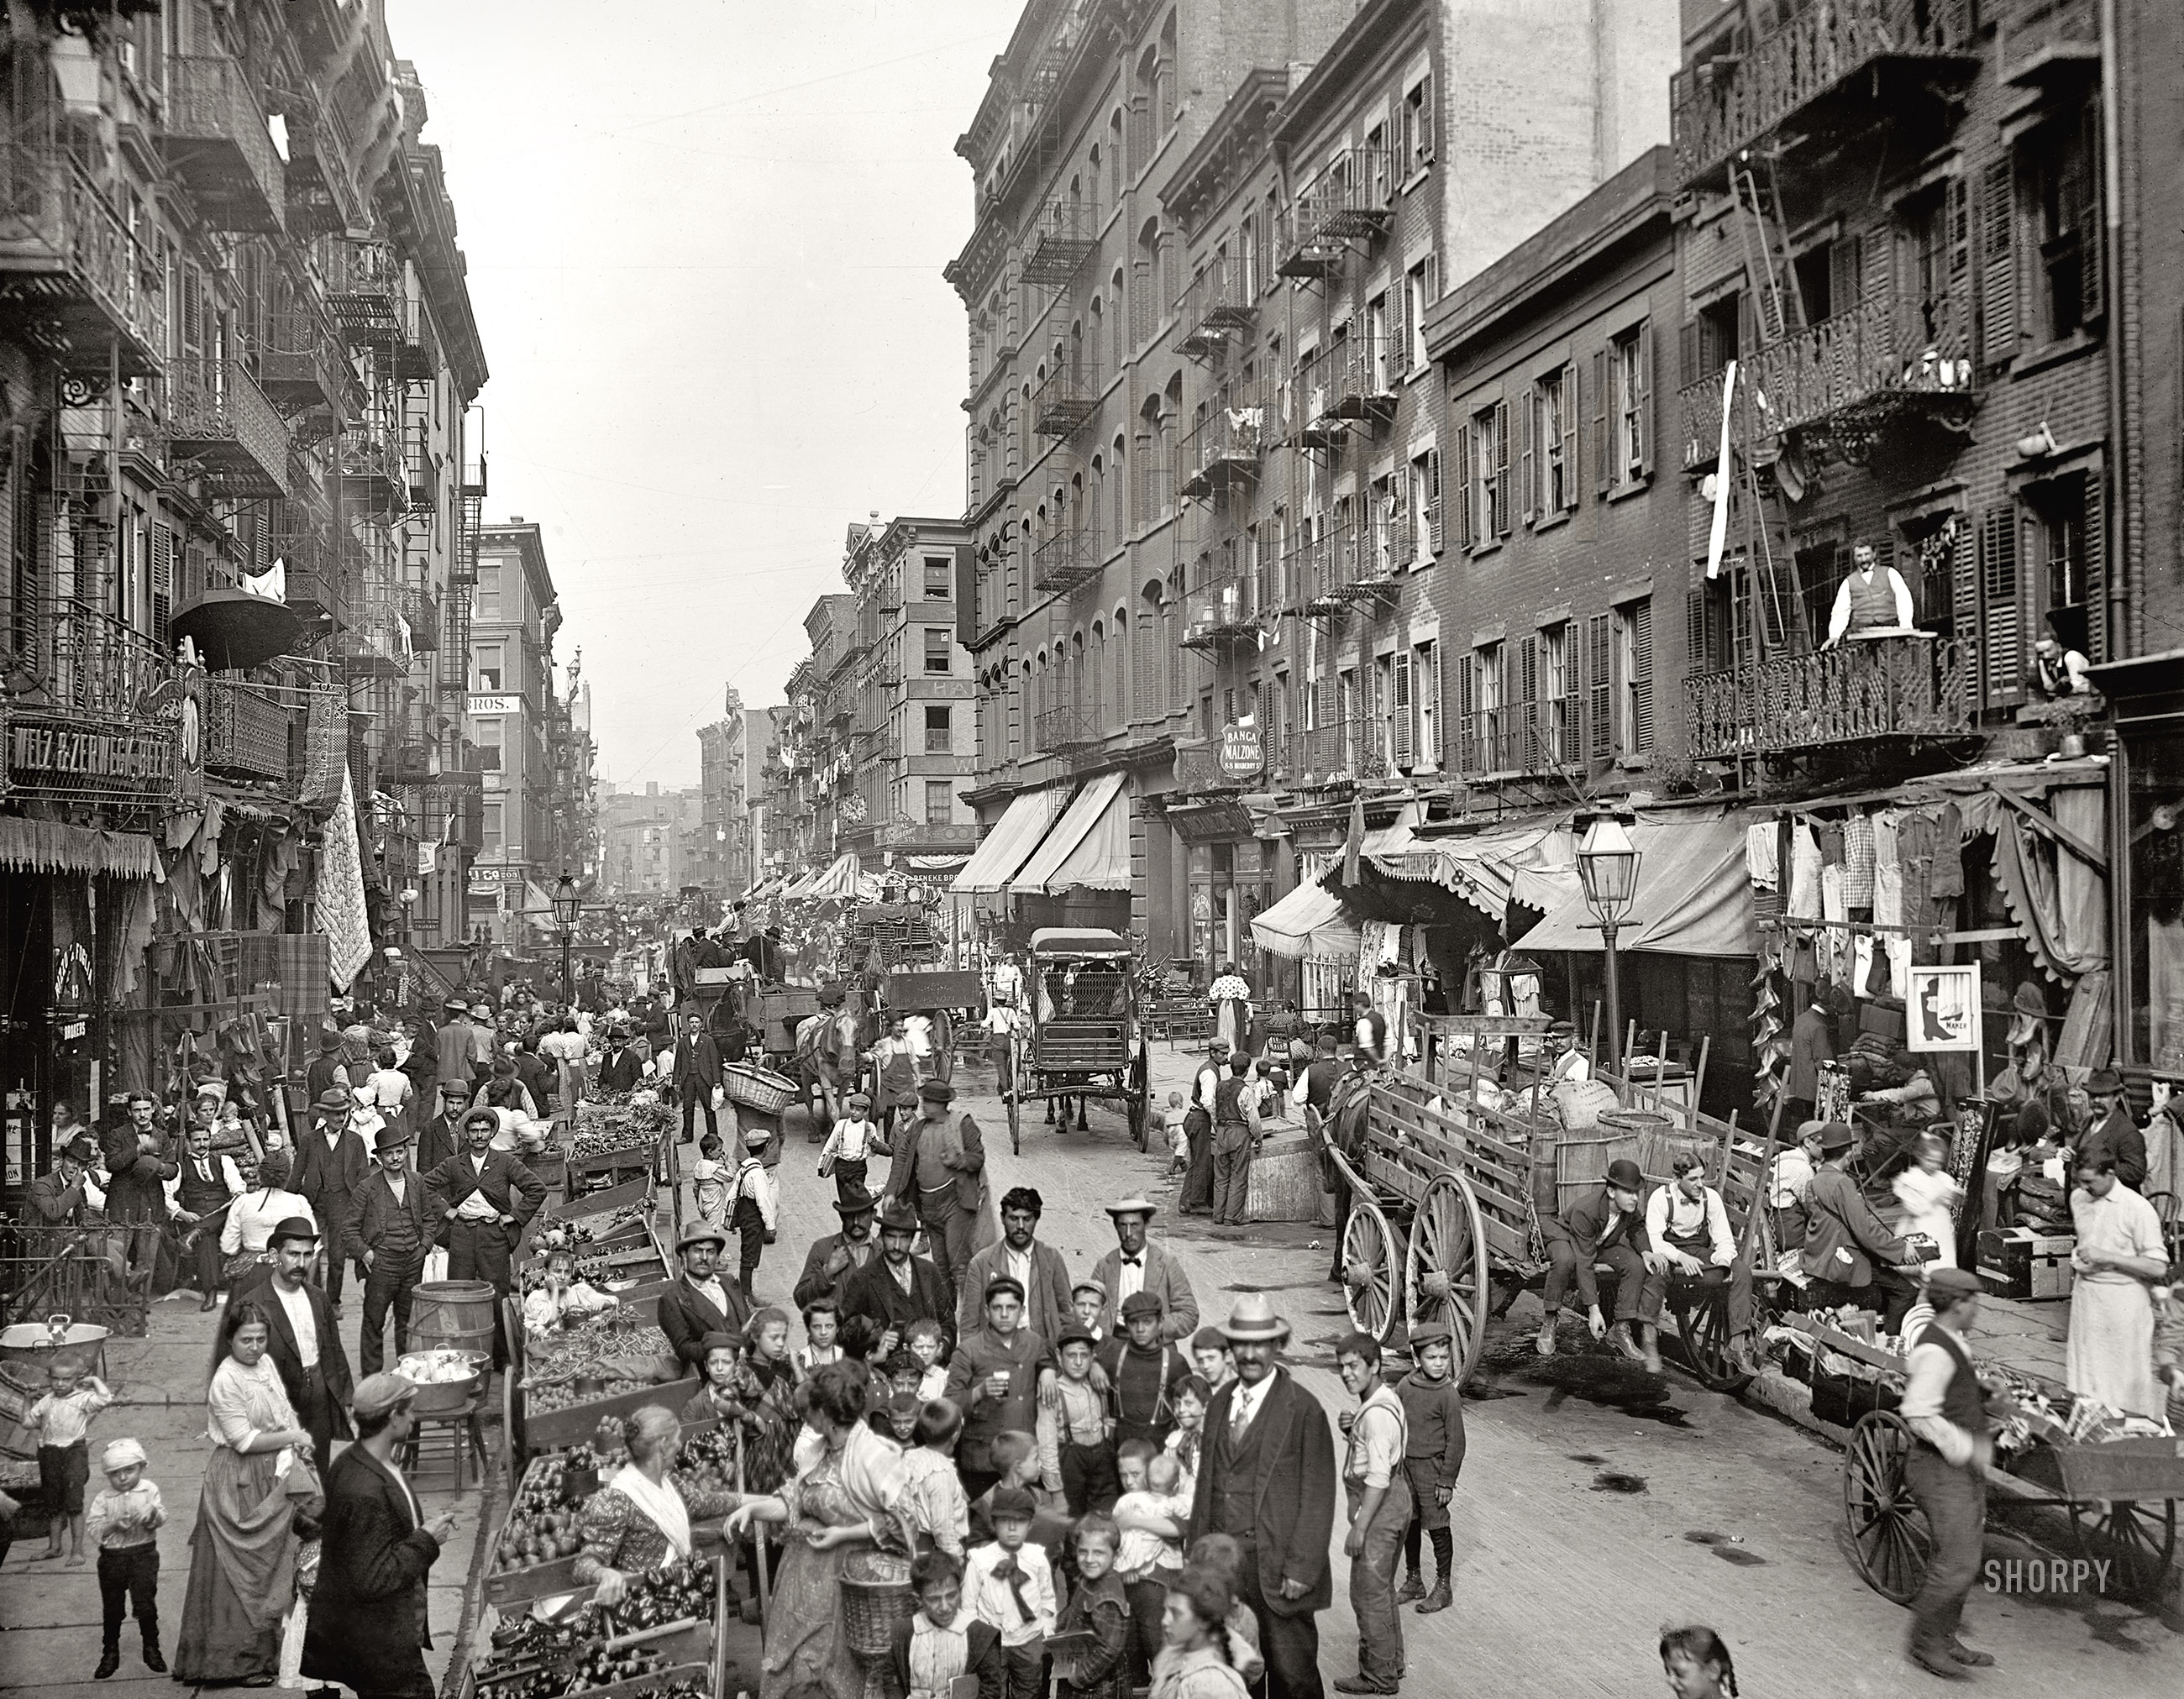 Little Italy circa 1900. "Mulberry Street, New York." 8x10 inch dry plate glass negative, Detroit Publishing Company. View full size.